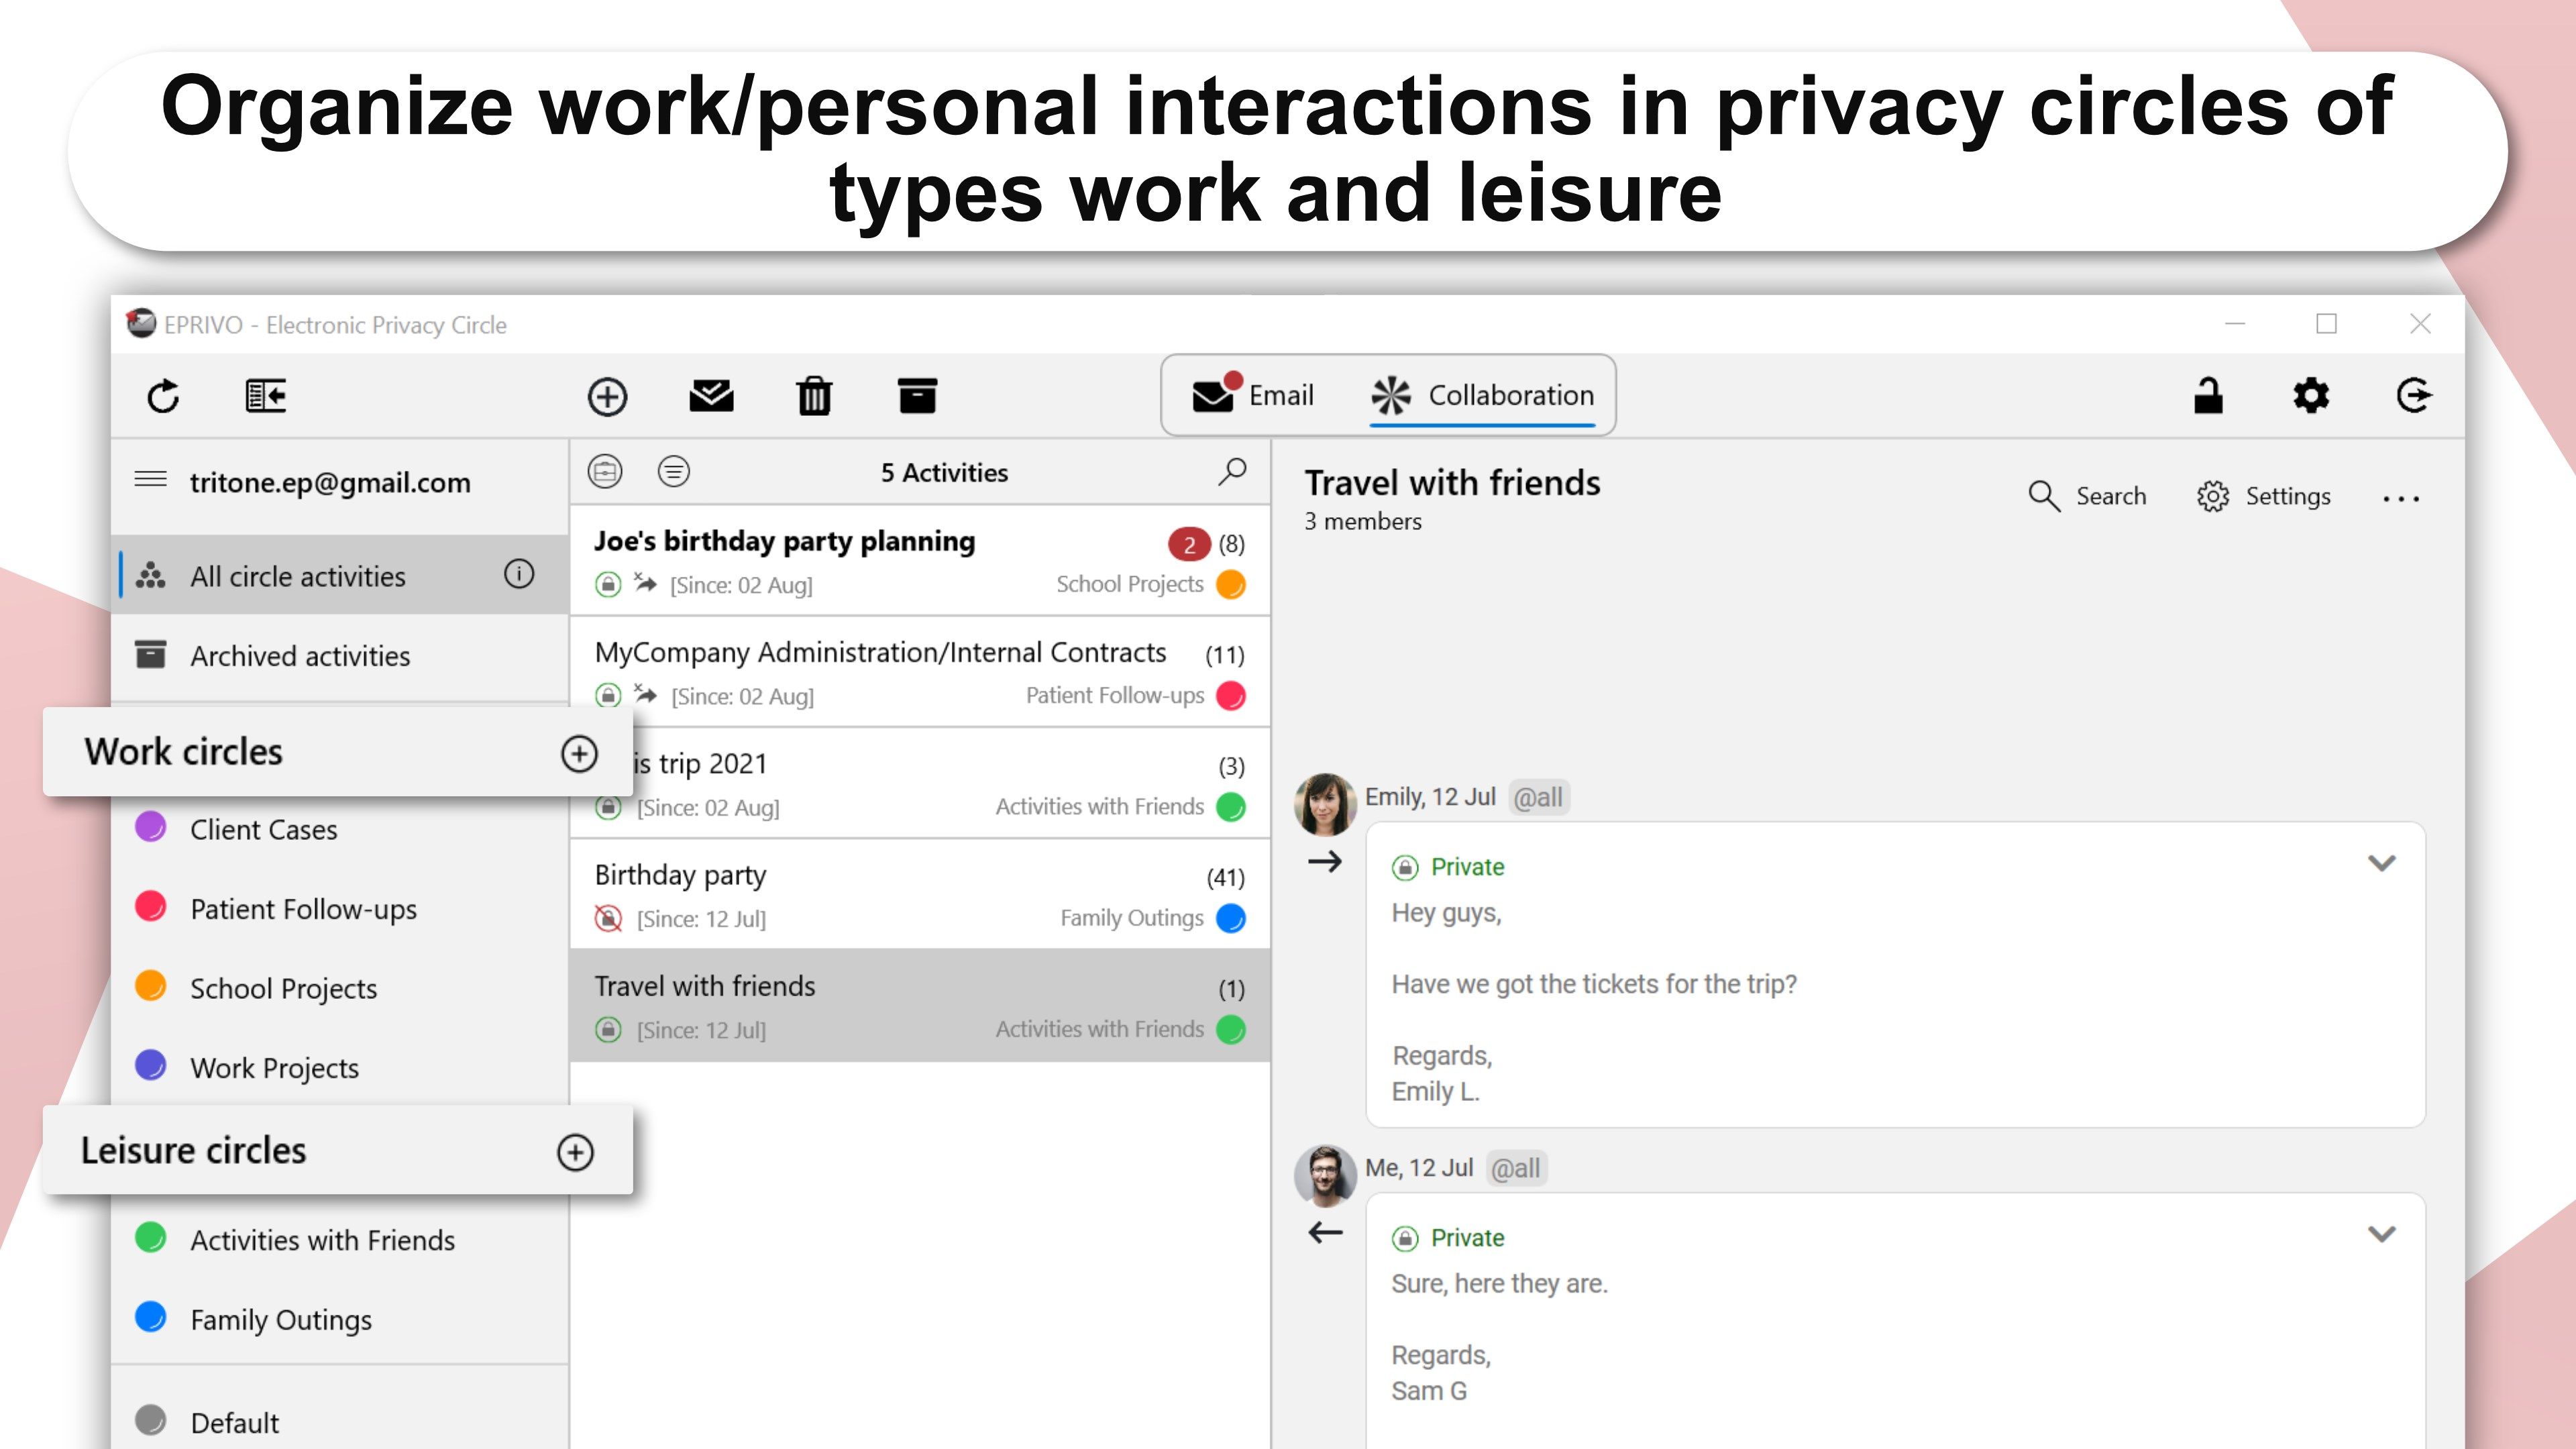 Organize work/personal interactions in privacy circles of types work and leisure